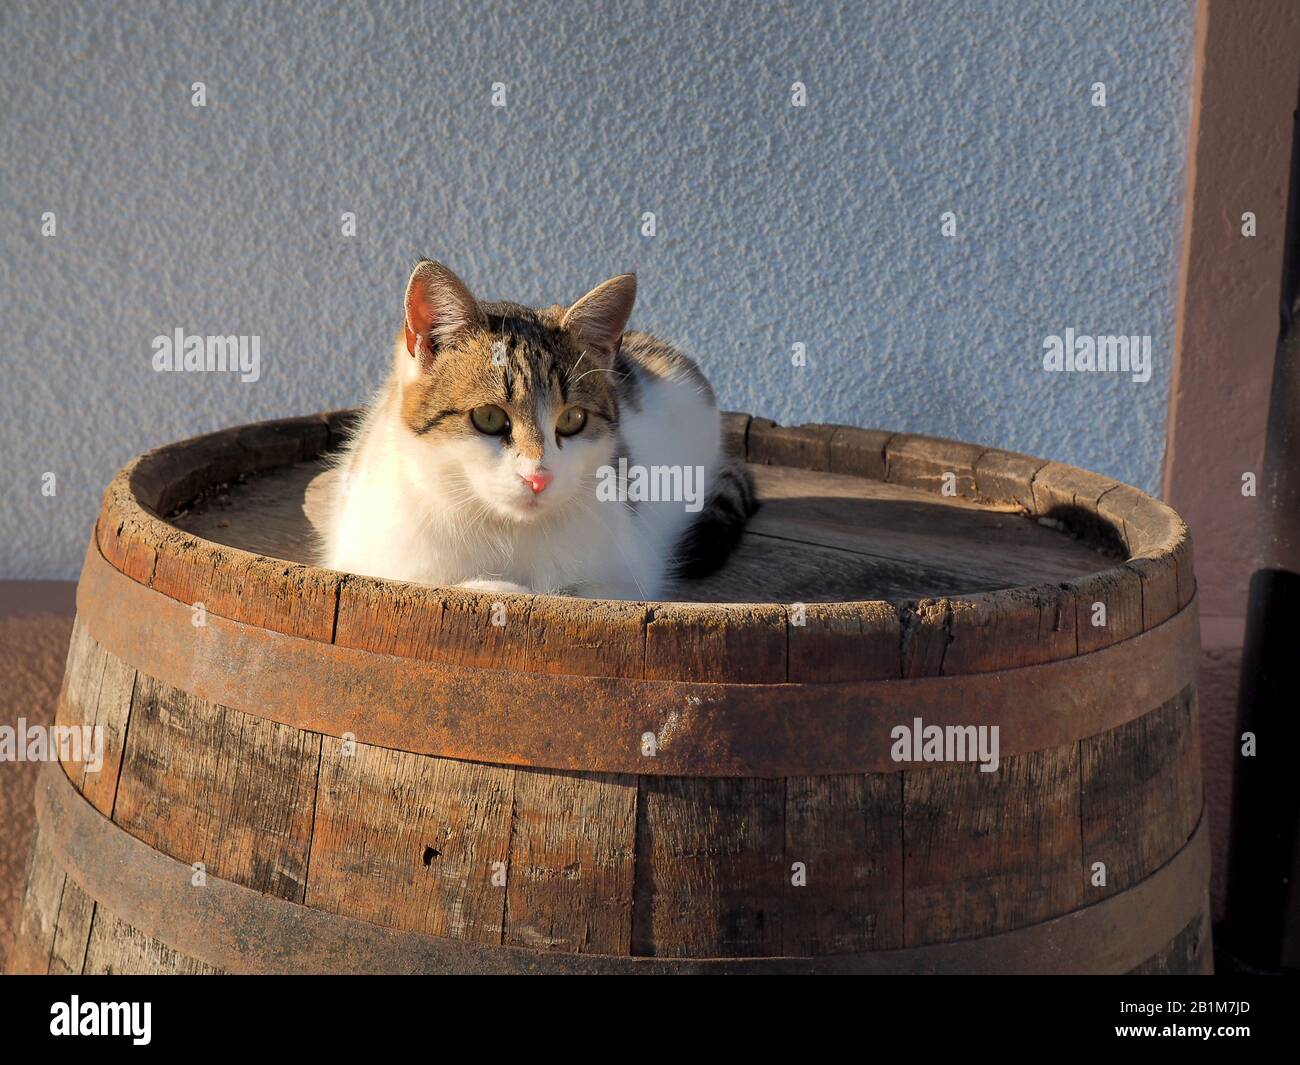 Cat on the old wooden barrel Stock Photo